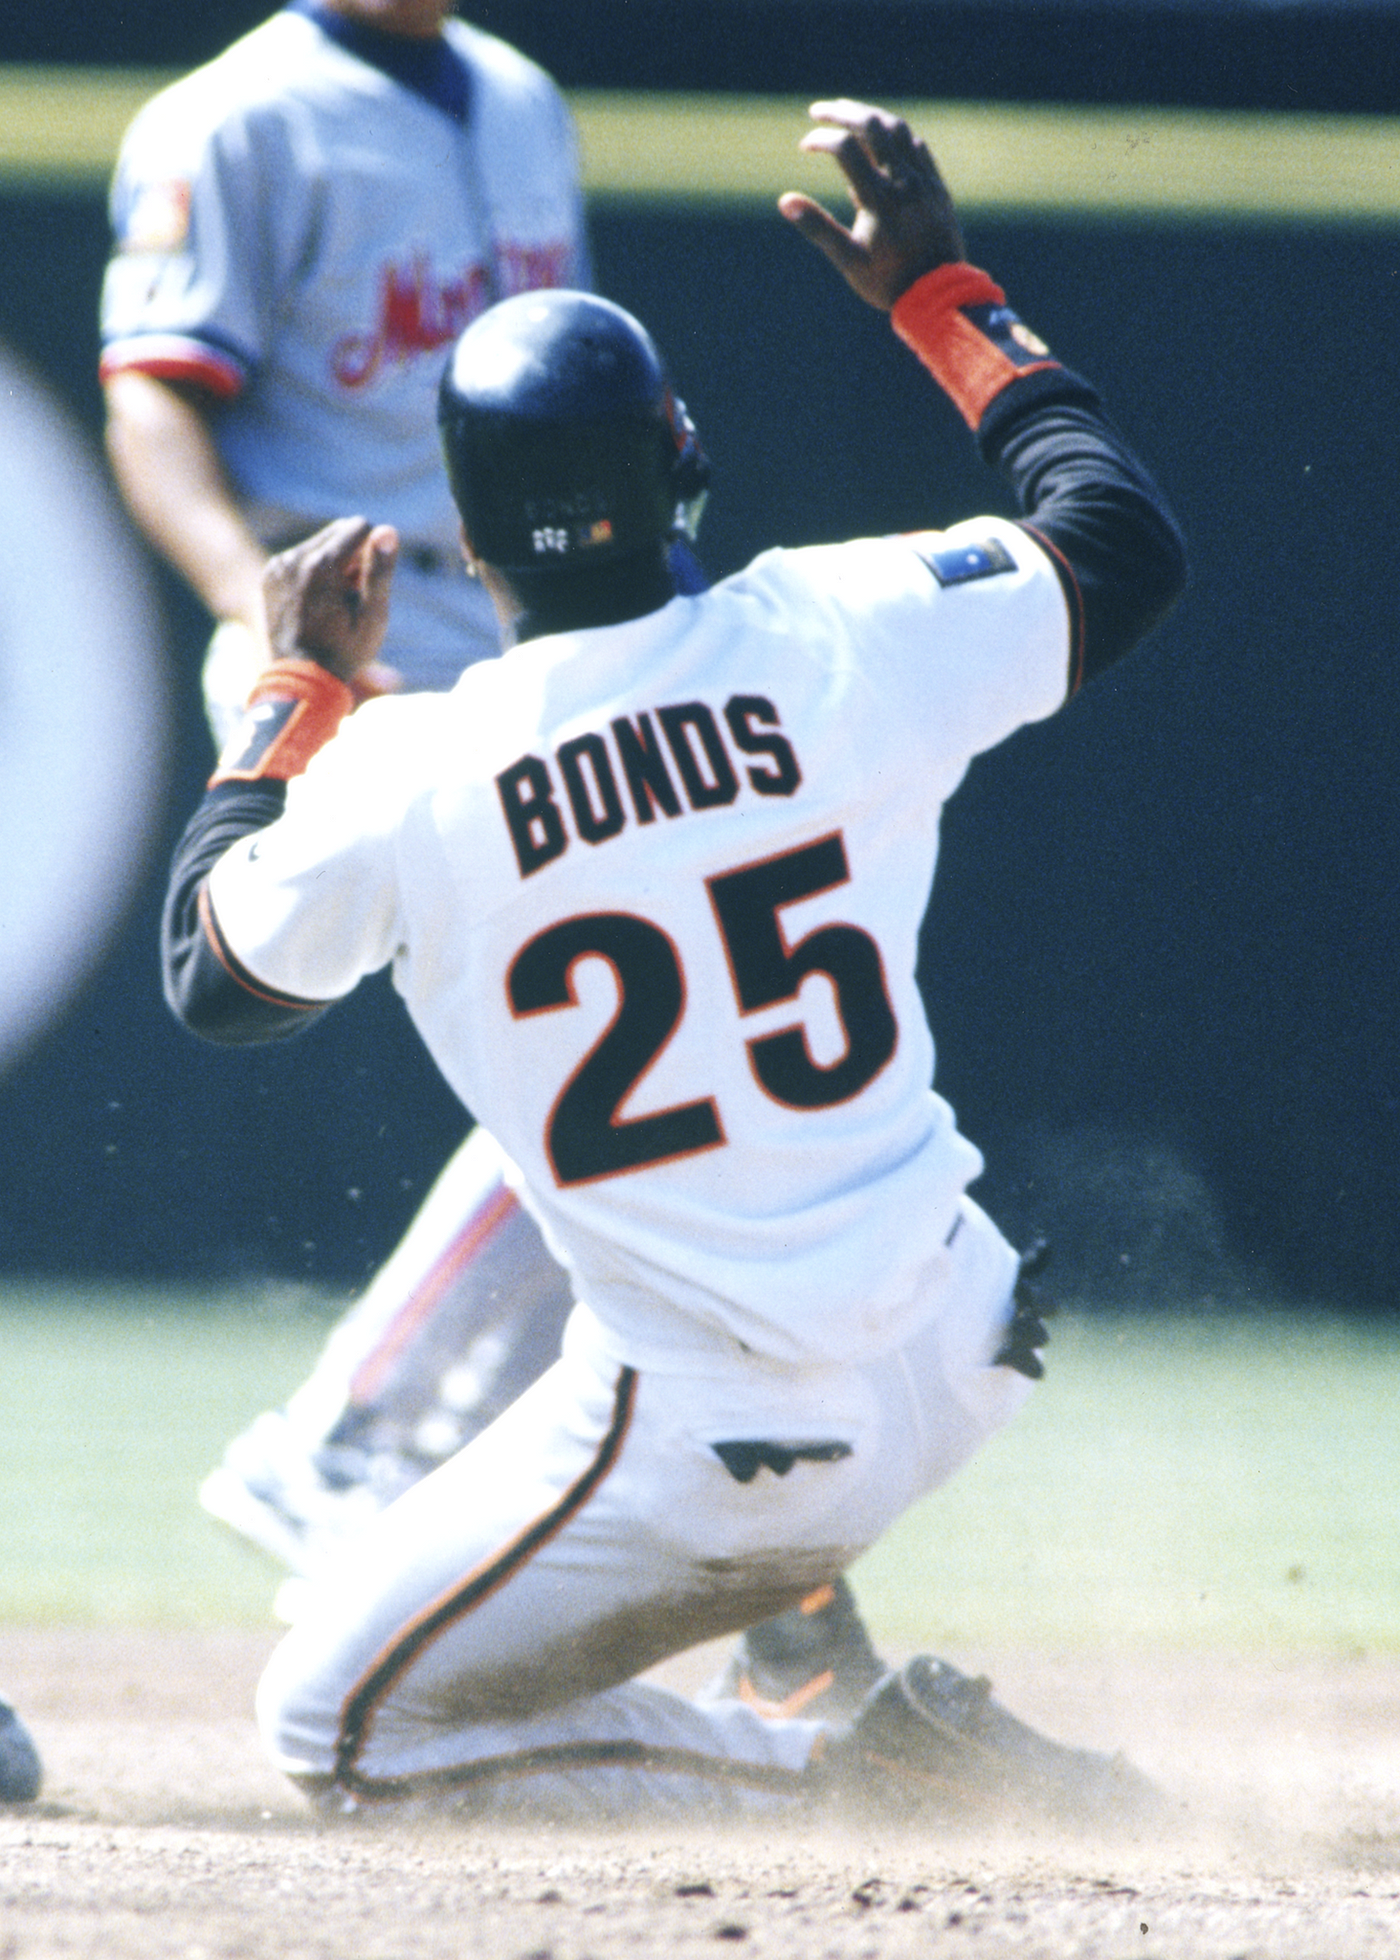 OTD: 16 Years Ago Barry Bonds Became the Only Member of the 500 HR